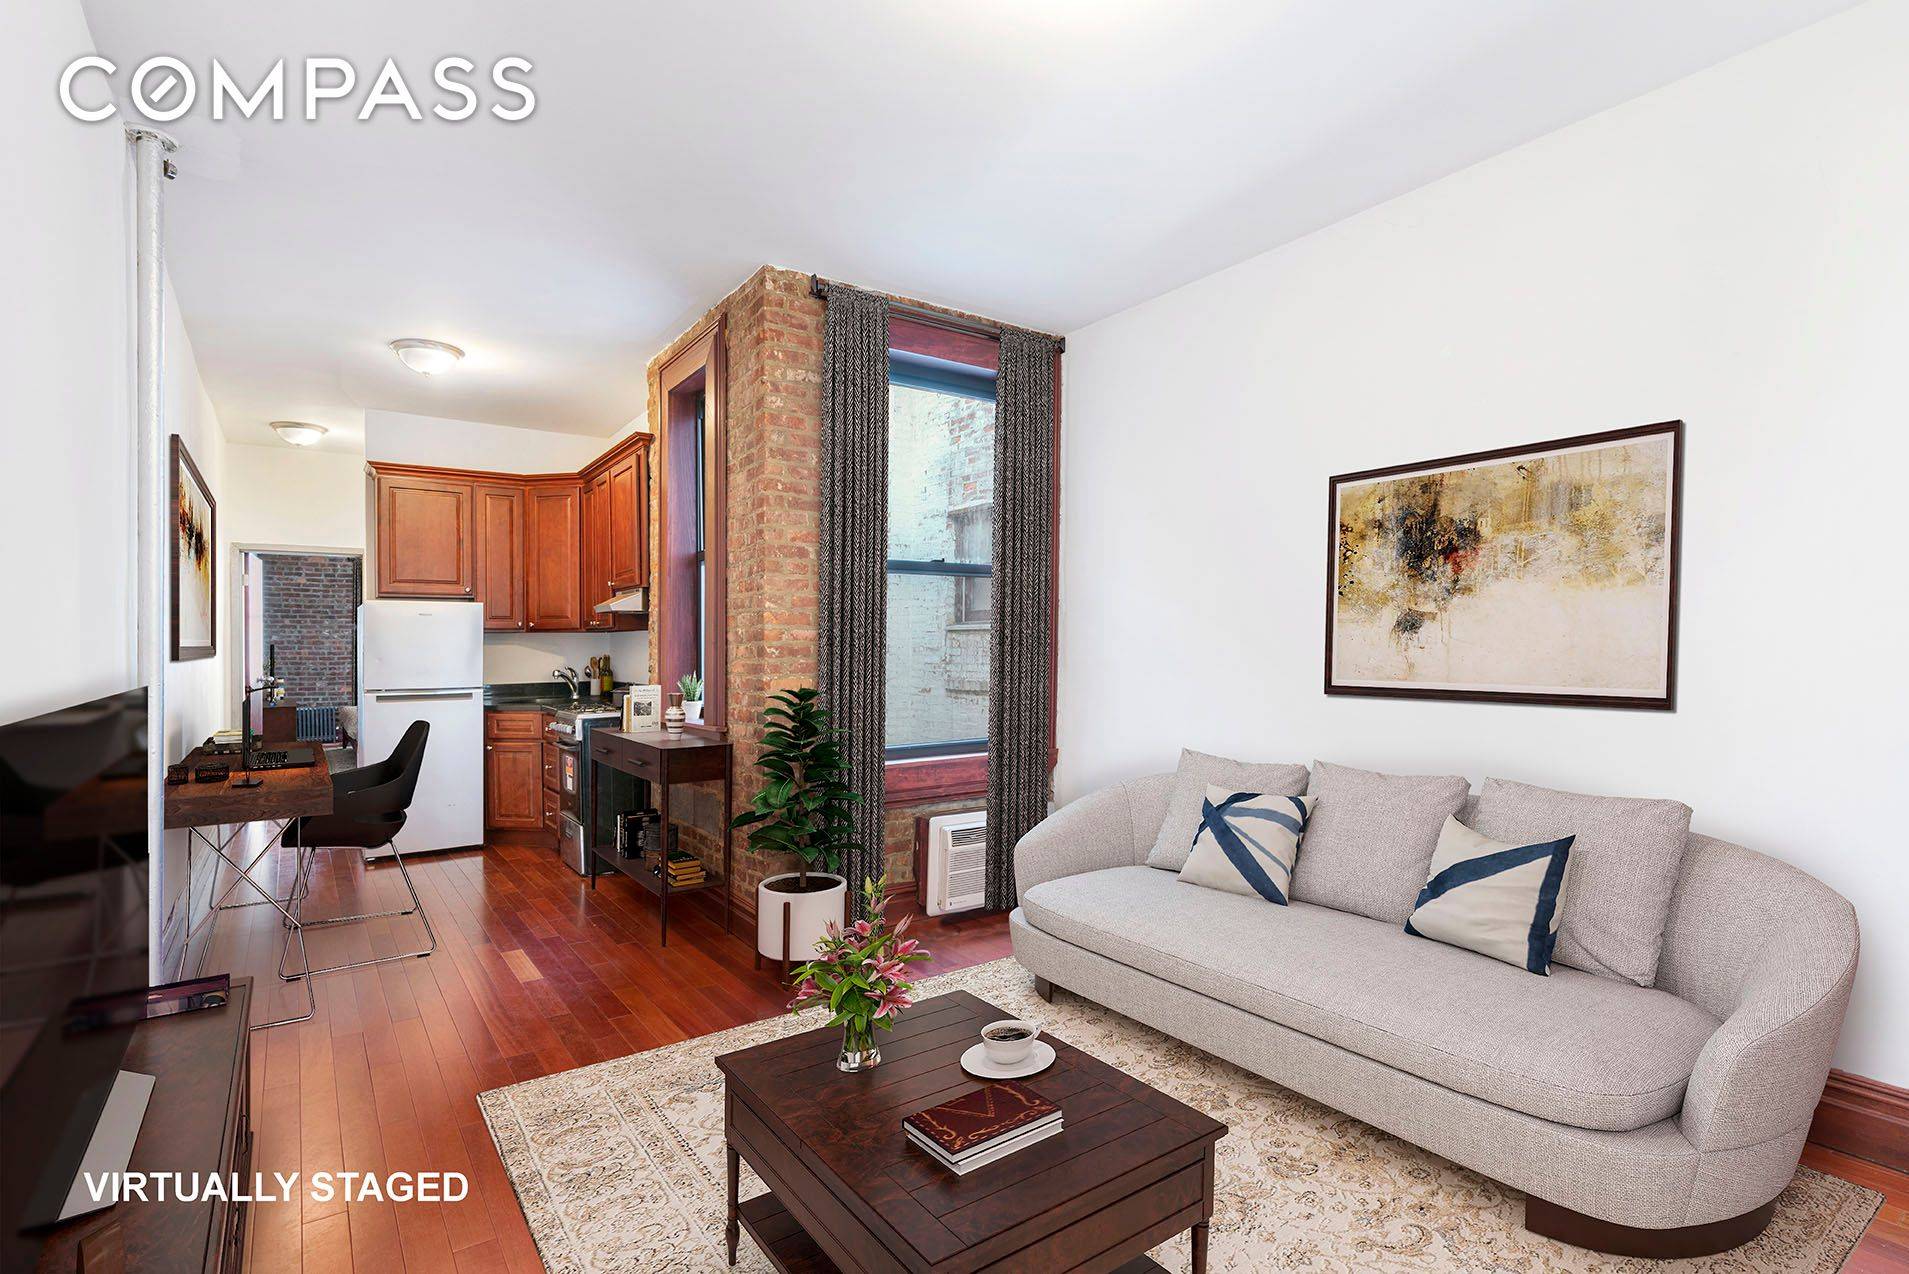 Prime Chelsea Expansive 1BD 1BA with Generous Floor Plan, Open Kitchen, Sprawling Hardwood Floors, Exposed Brick, Tall Ceilings, and Close to Subways This sun filled home features tall ceilings and ...